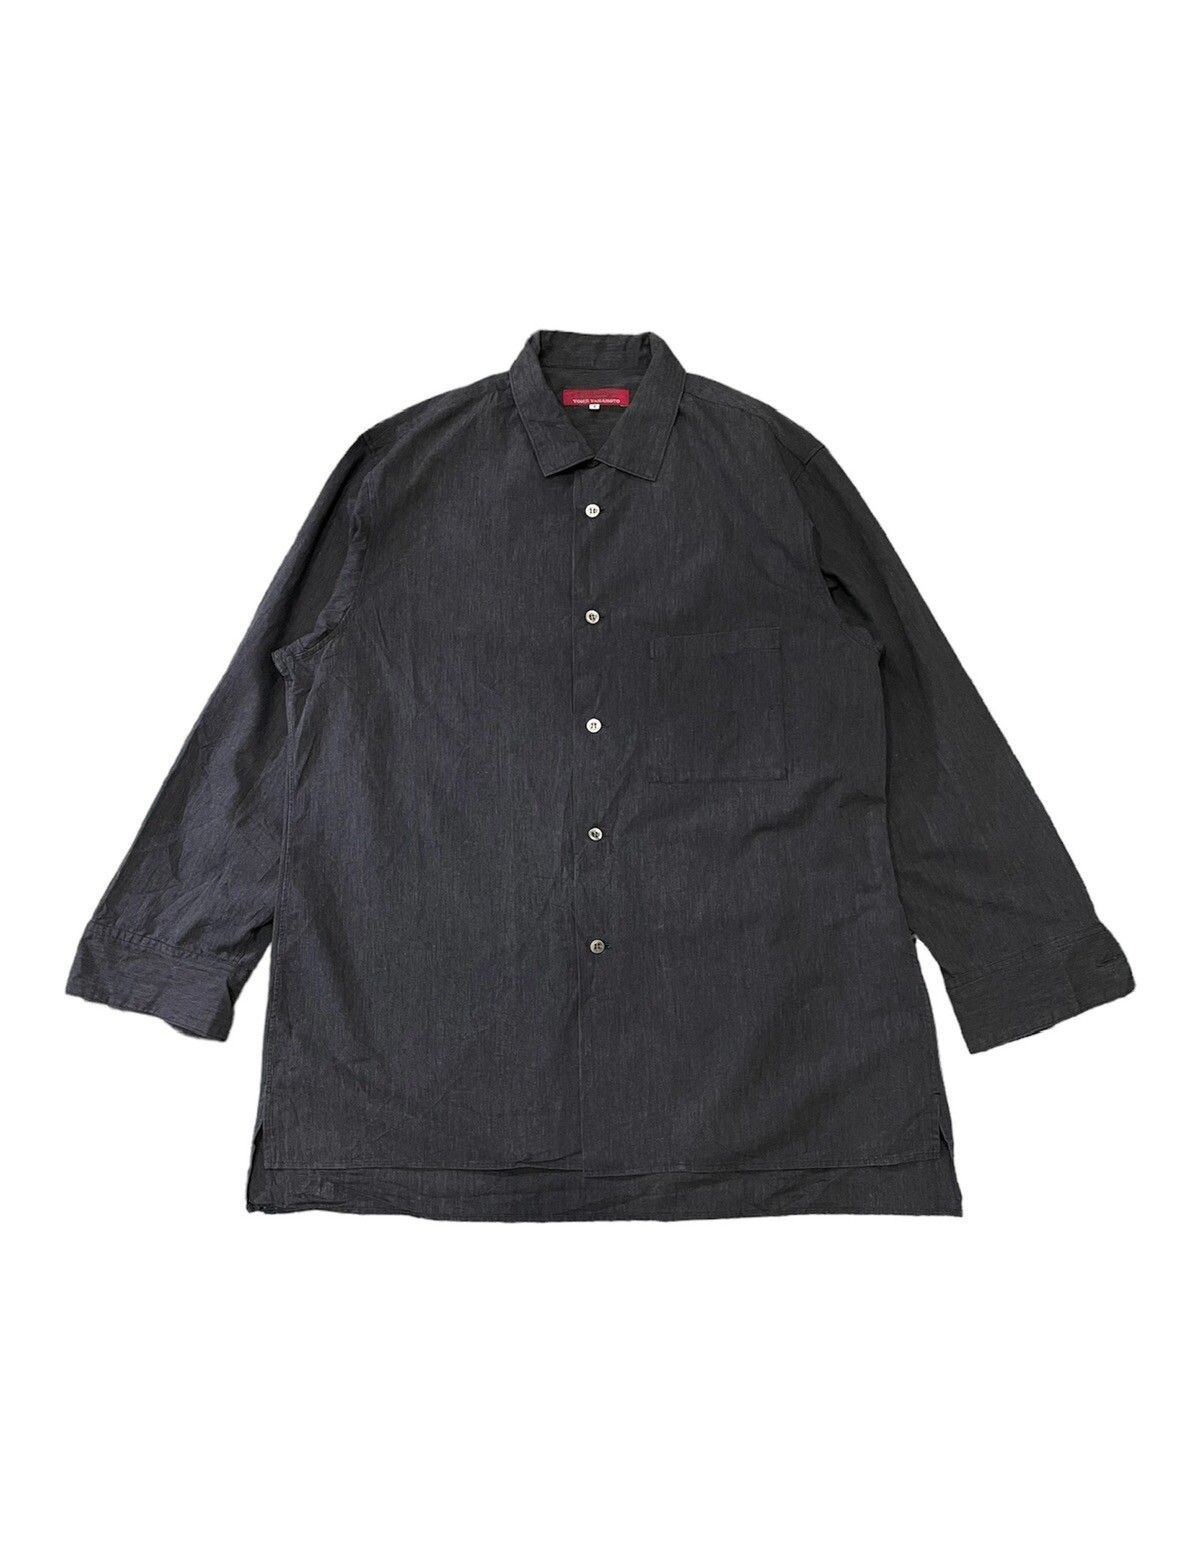 Y’s For Men Red Label Size-2 Button Up Shirt - 2